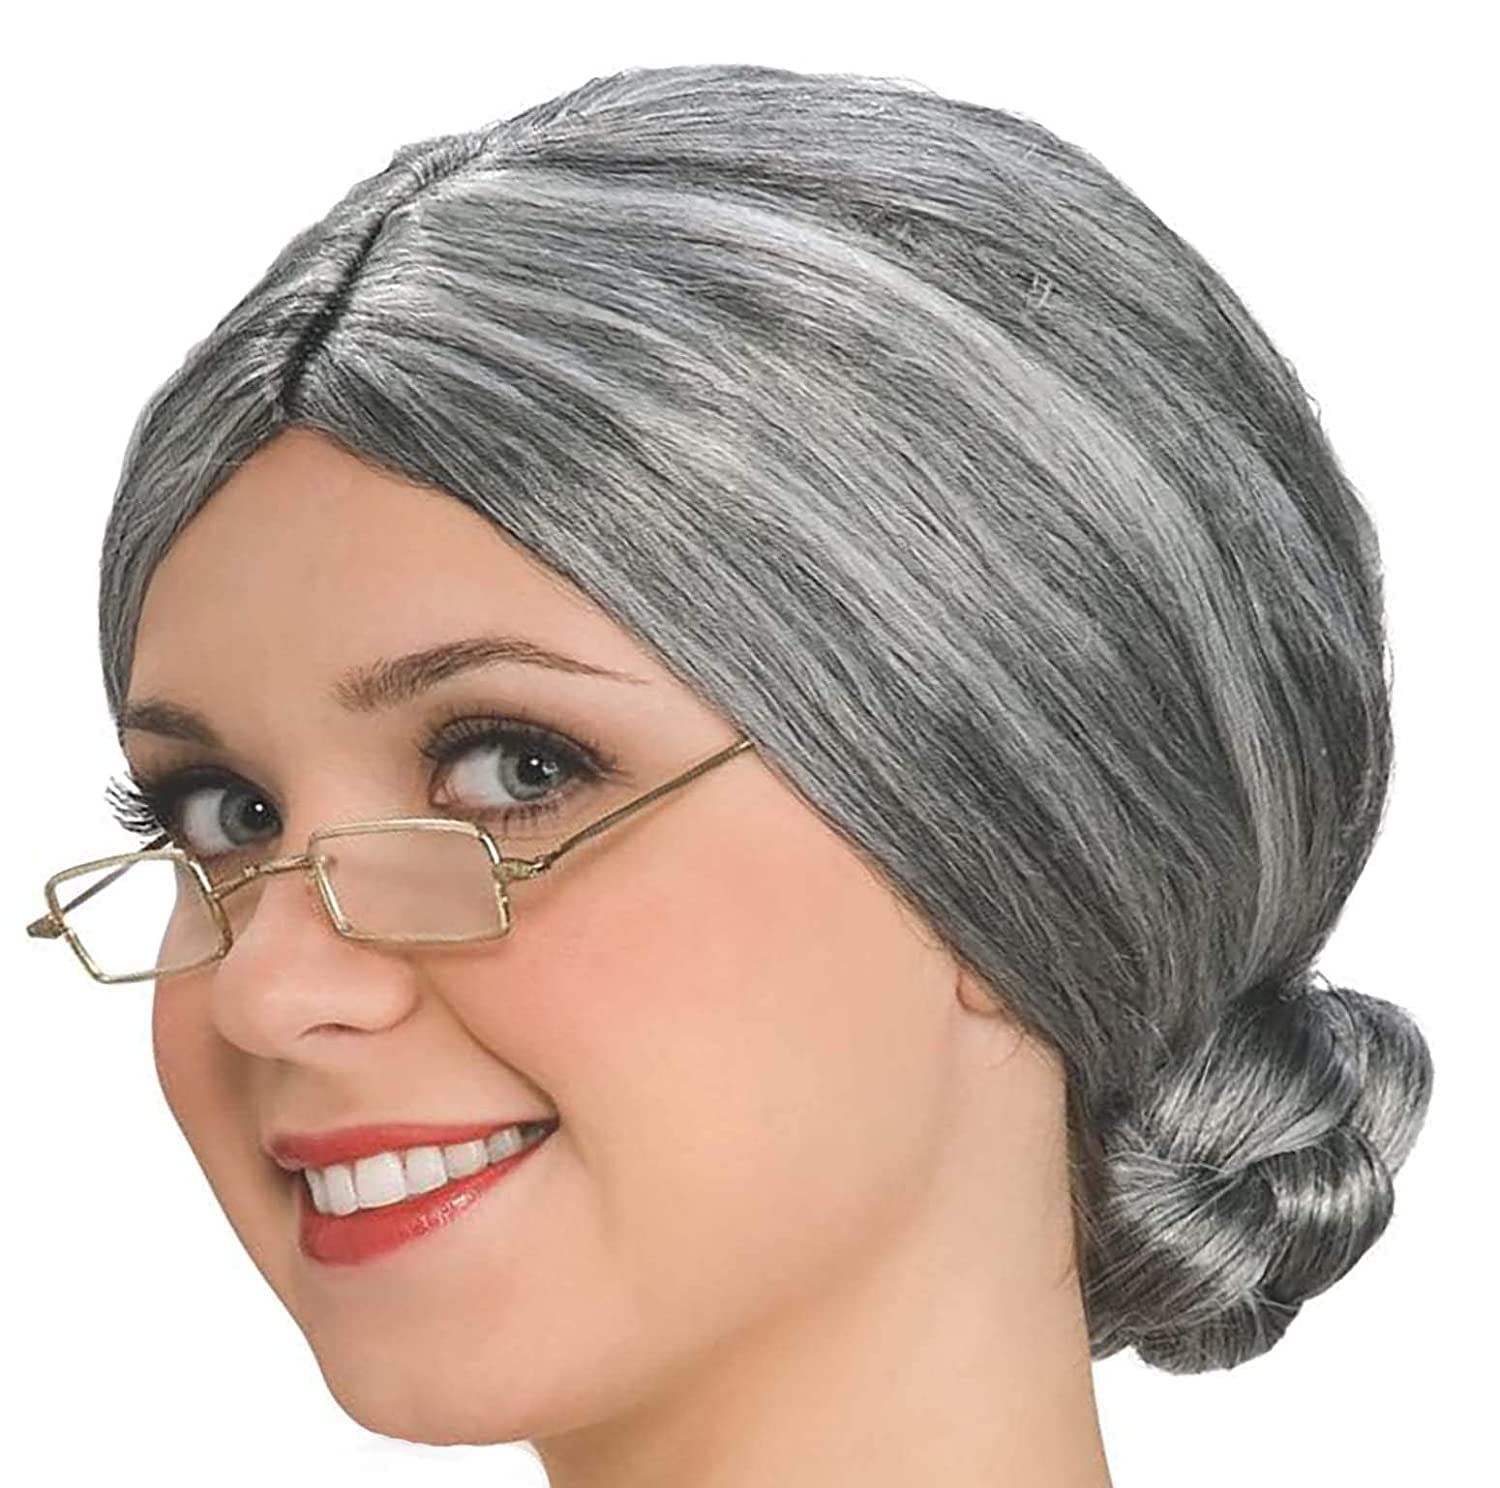 4E's Novelty Old Lady Costume for Kids - 5 Pcs Set for 100th Day of School Grandma Costume for Kids Girls, Gray Wig, Glasses with Chain, Wig Cap, Necklace